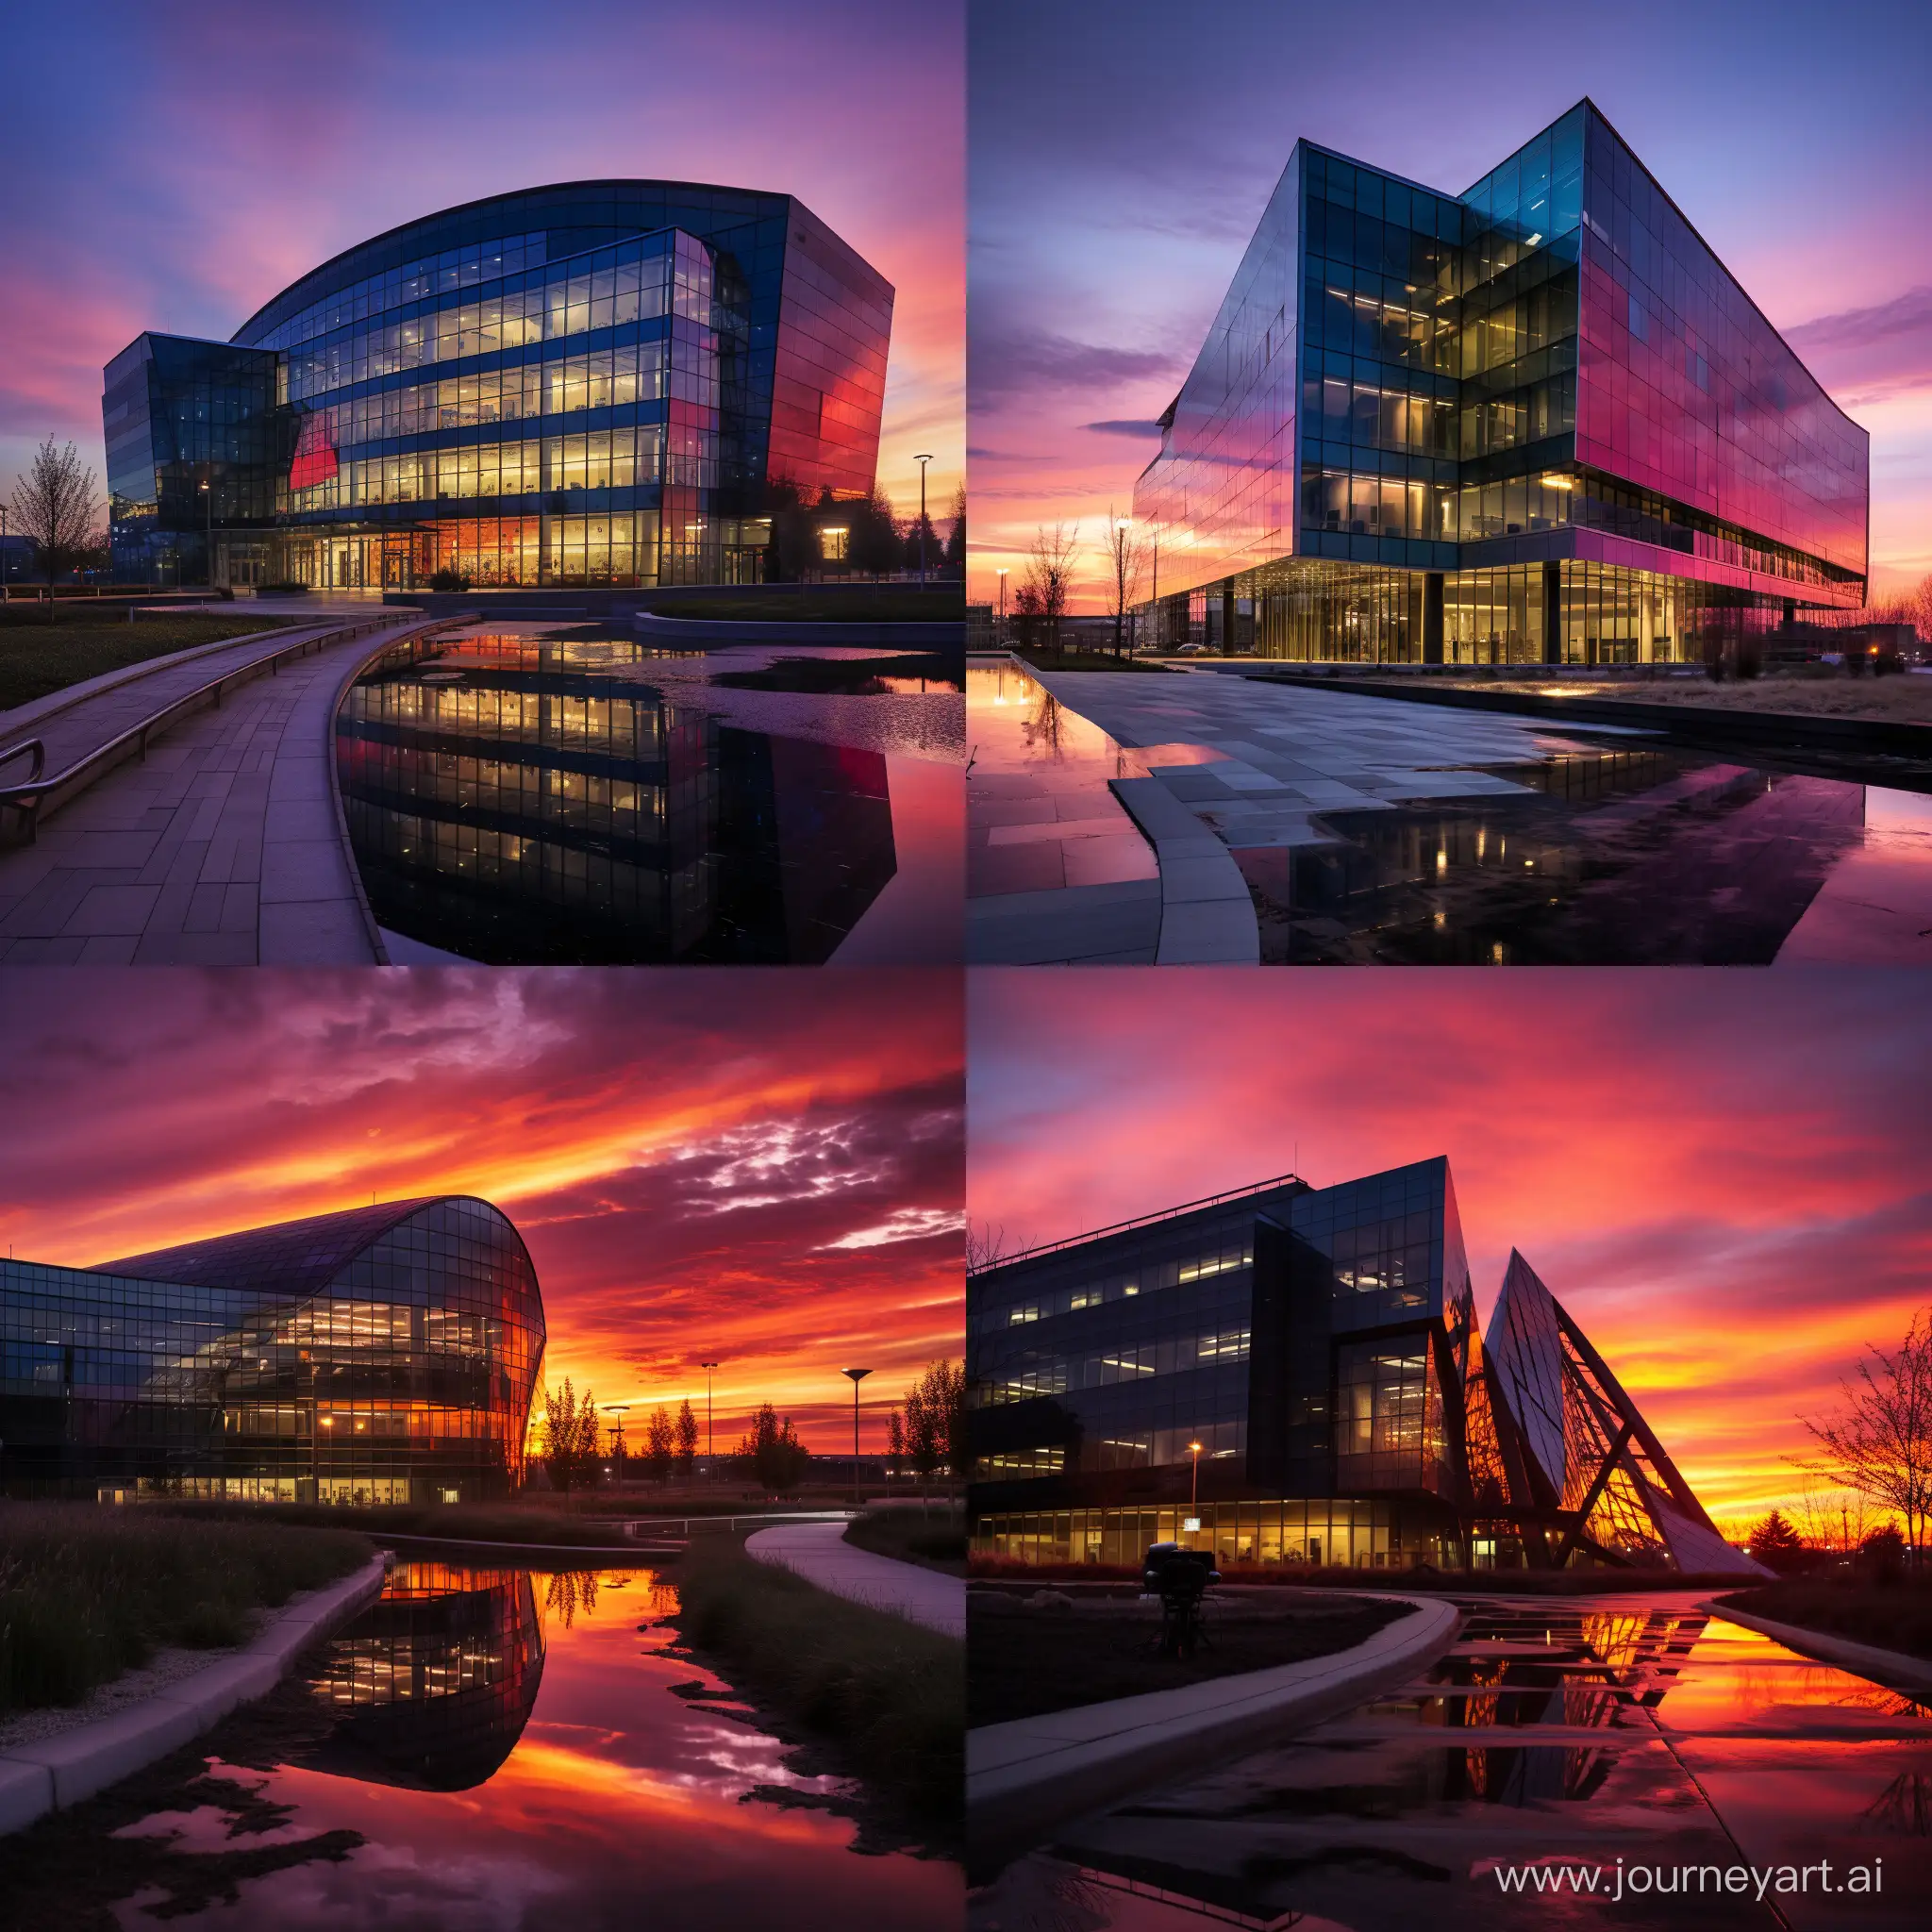 /imagine , Microsoft building during sunset with a photographic camera
